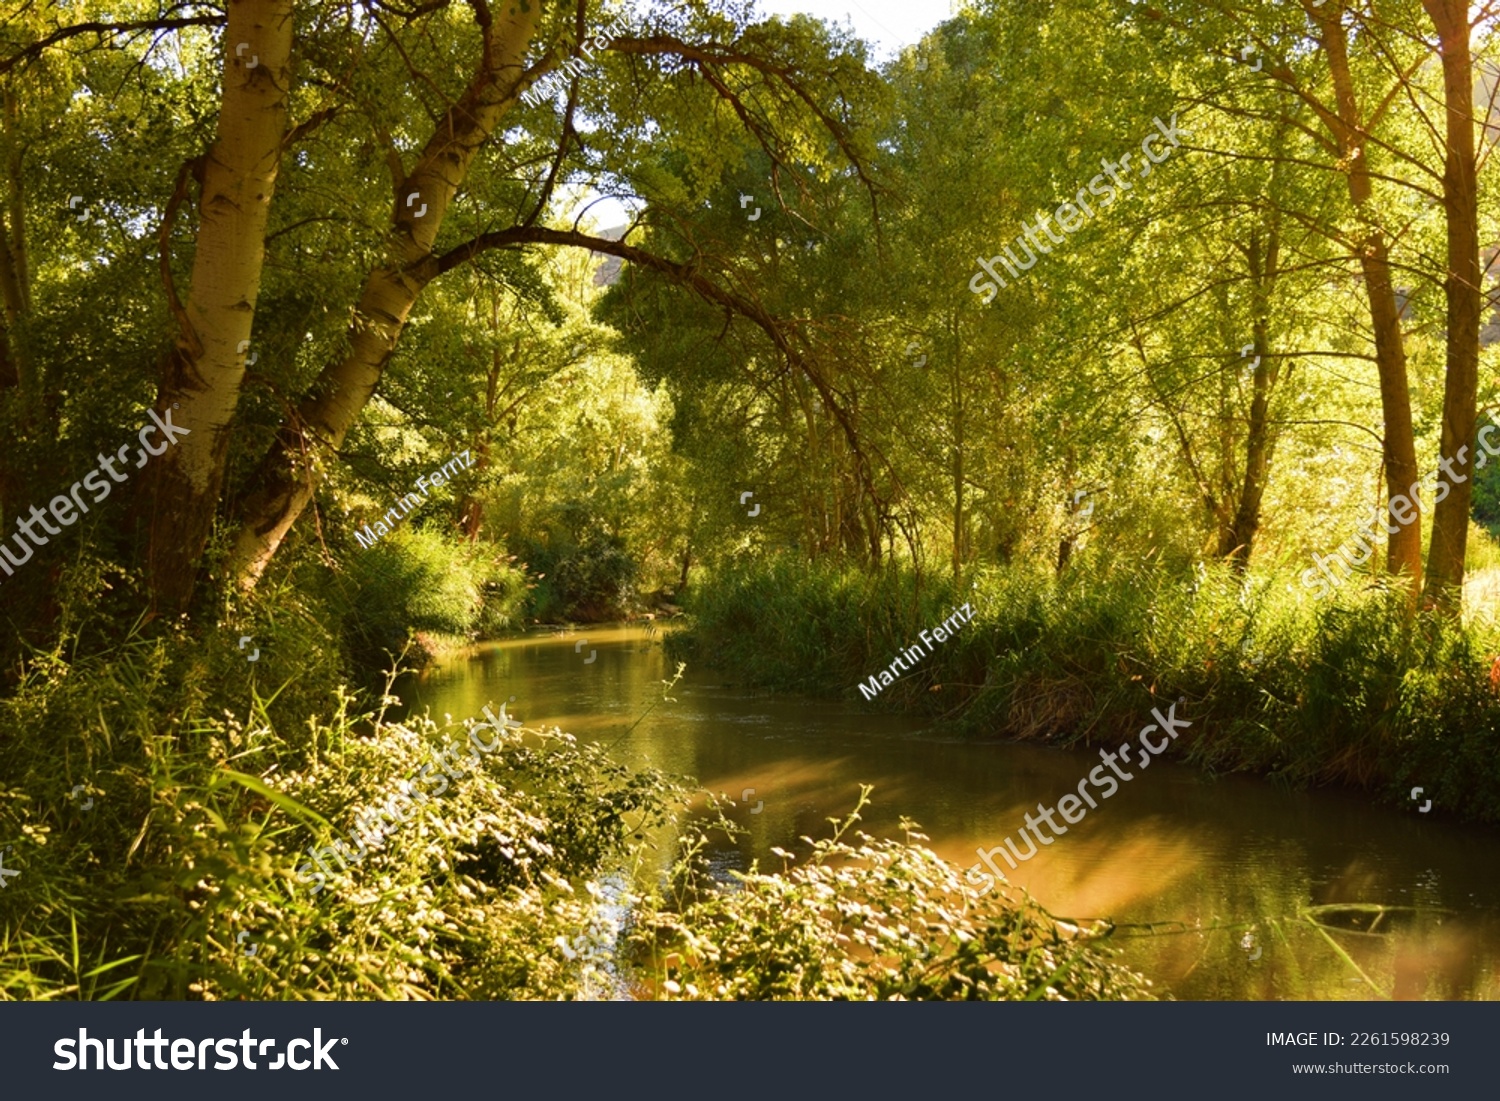 Beautiful view of the Turia river running through a lush forest in the stretch of Rincón de Ademuz in Spain, on a sunny summer afternoon #2261598239